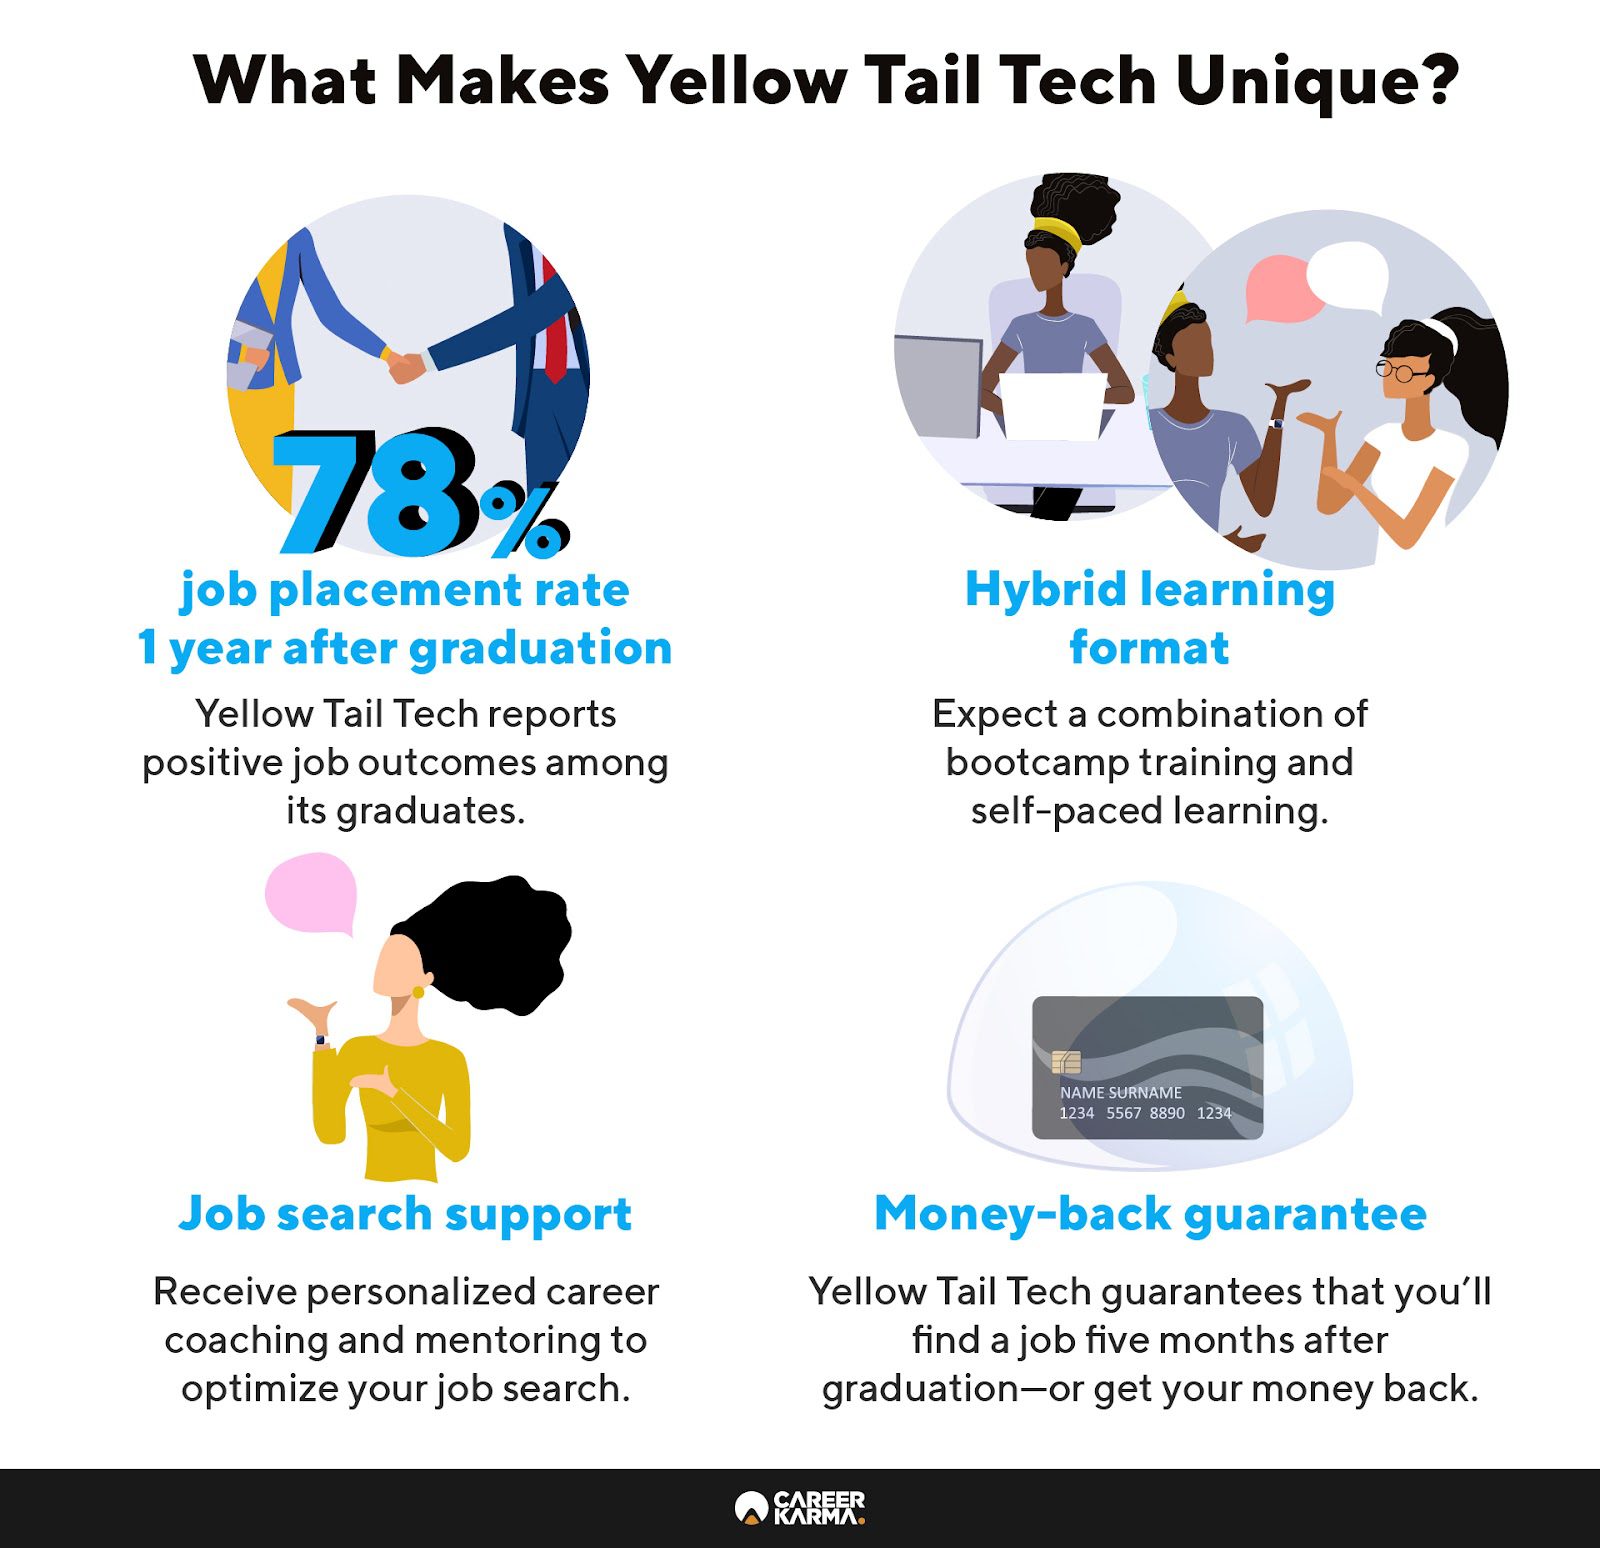 An infographic highlighting Yellow Tail Tech’s key features